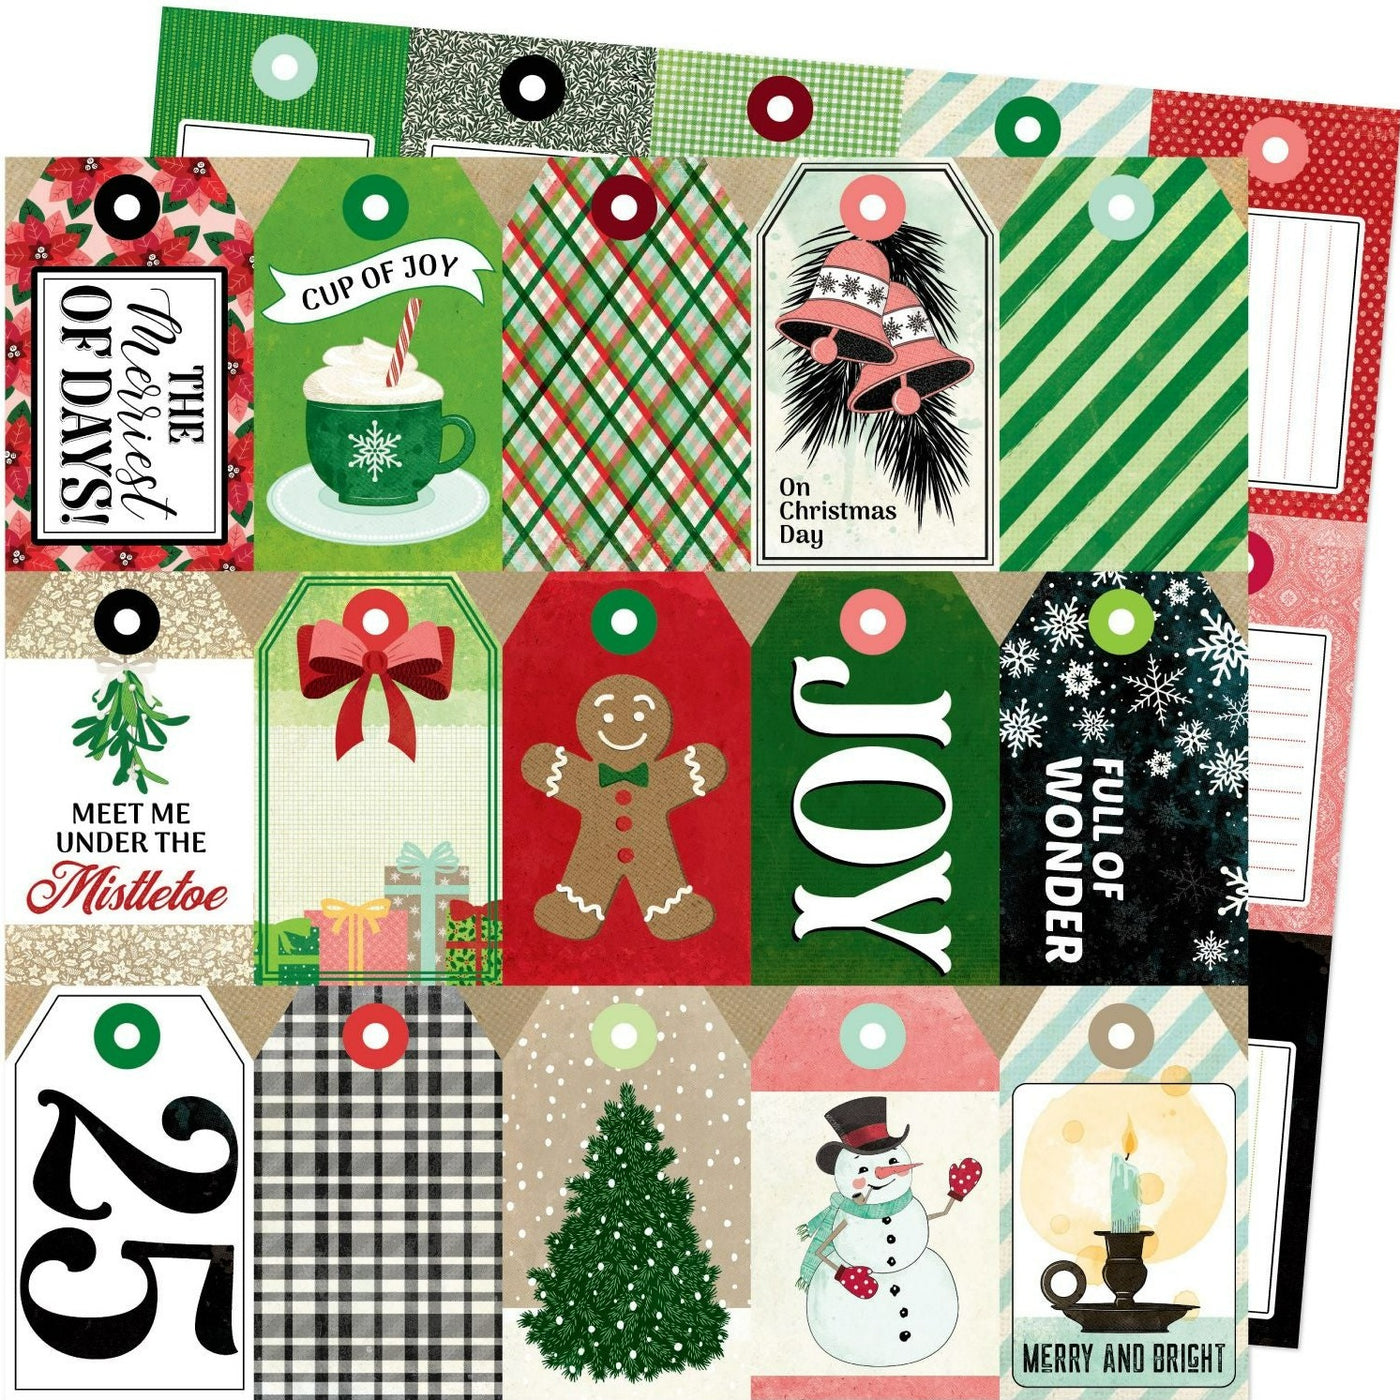 (Side A - Christmas journaling tags, Side B - blank Christmas journaling tags)